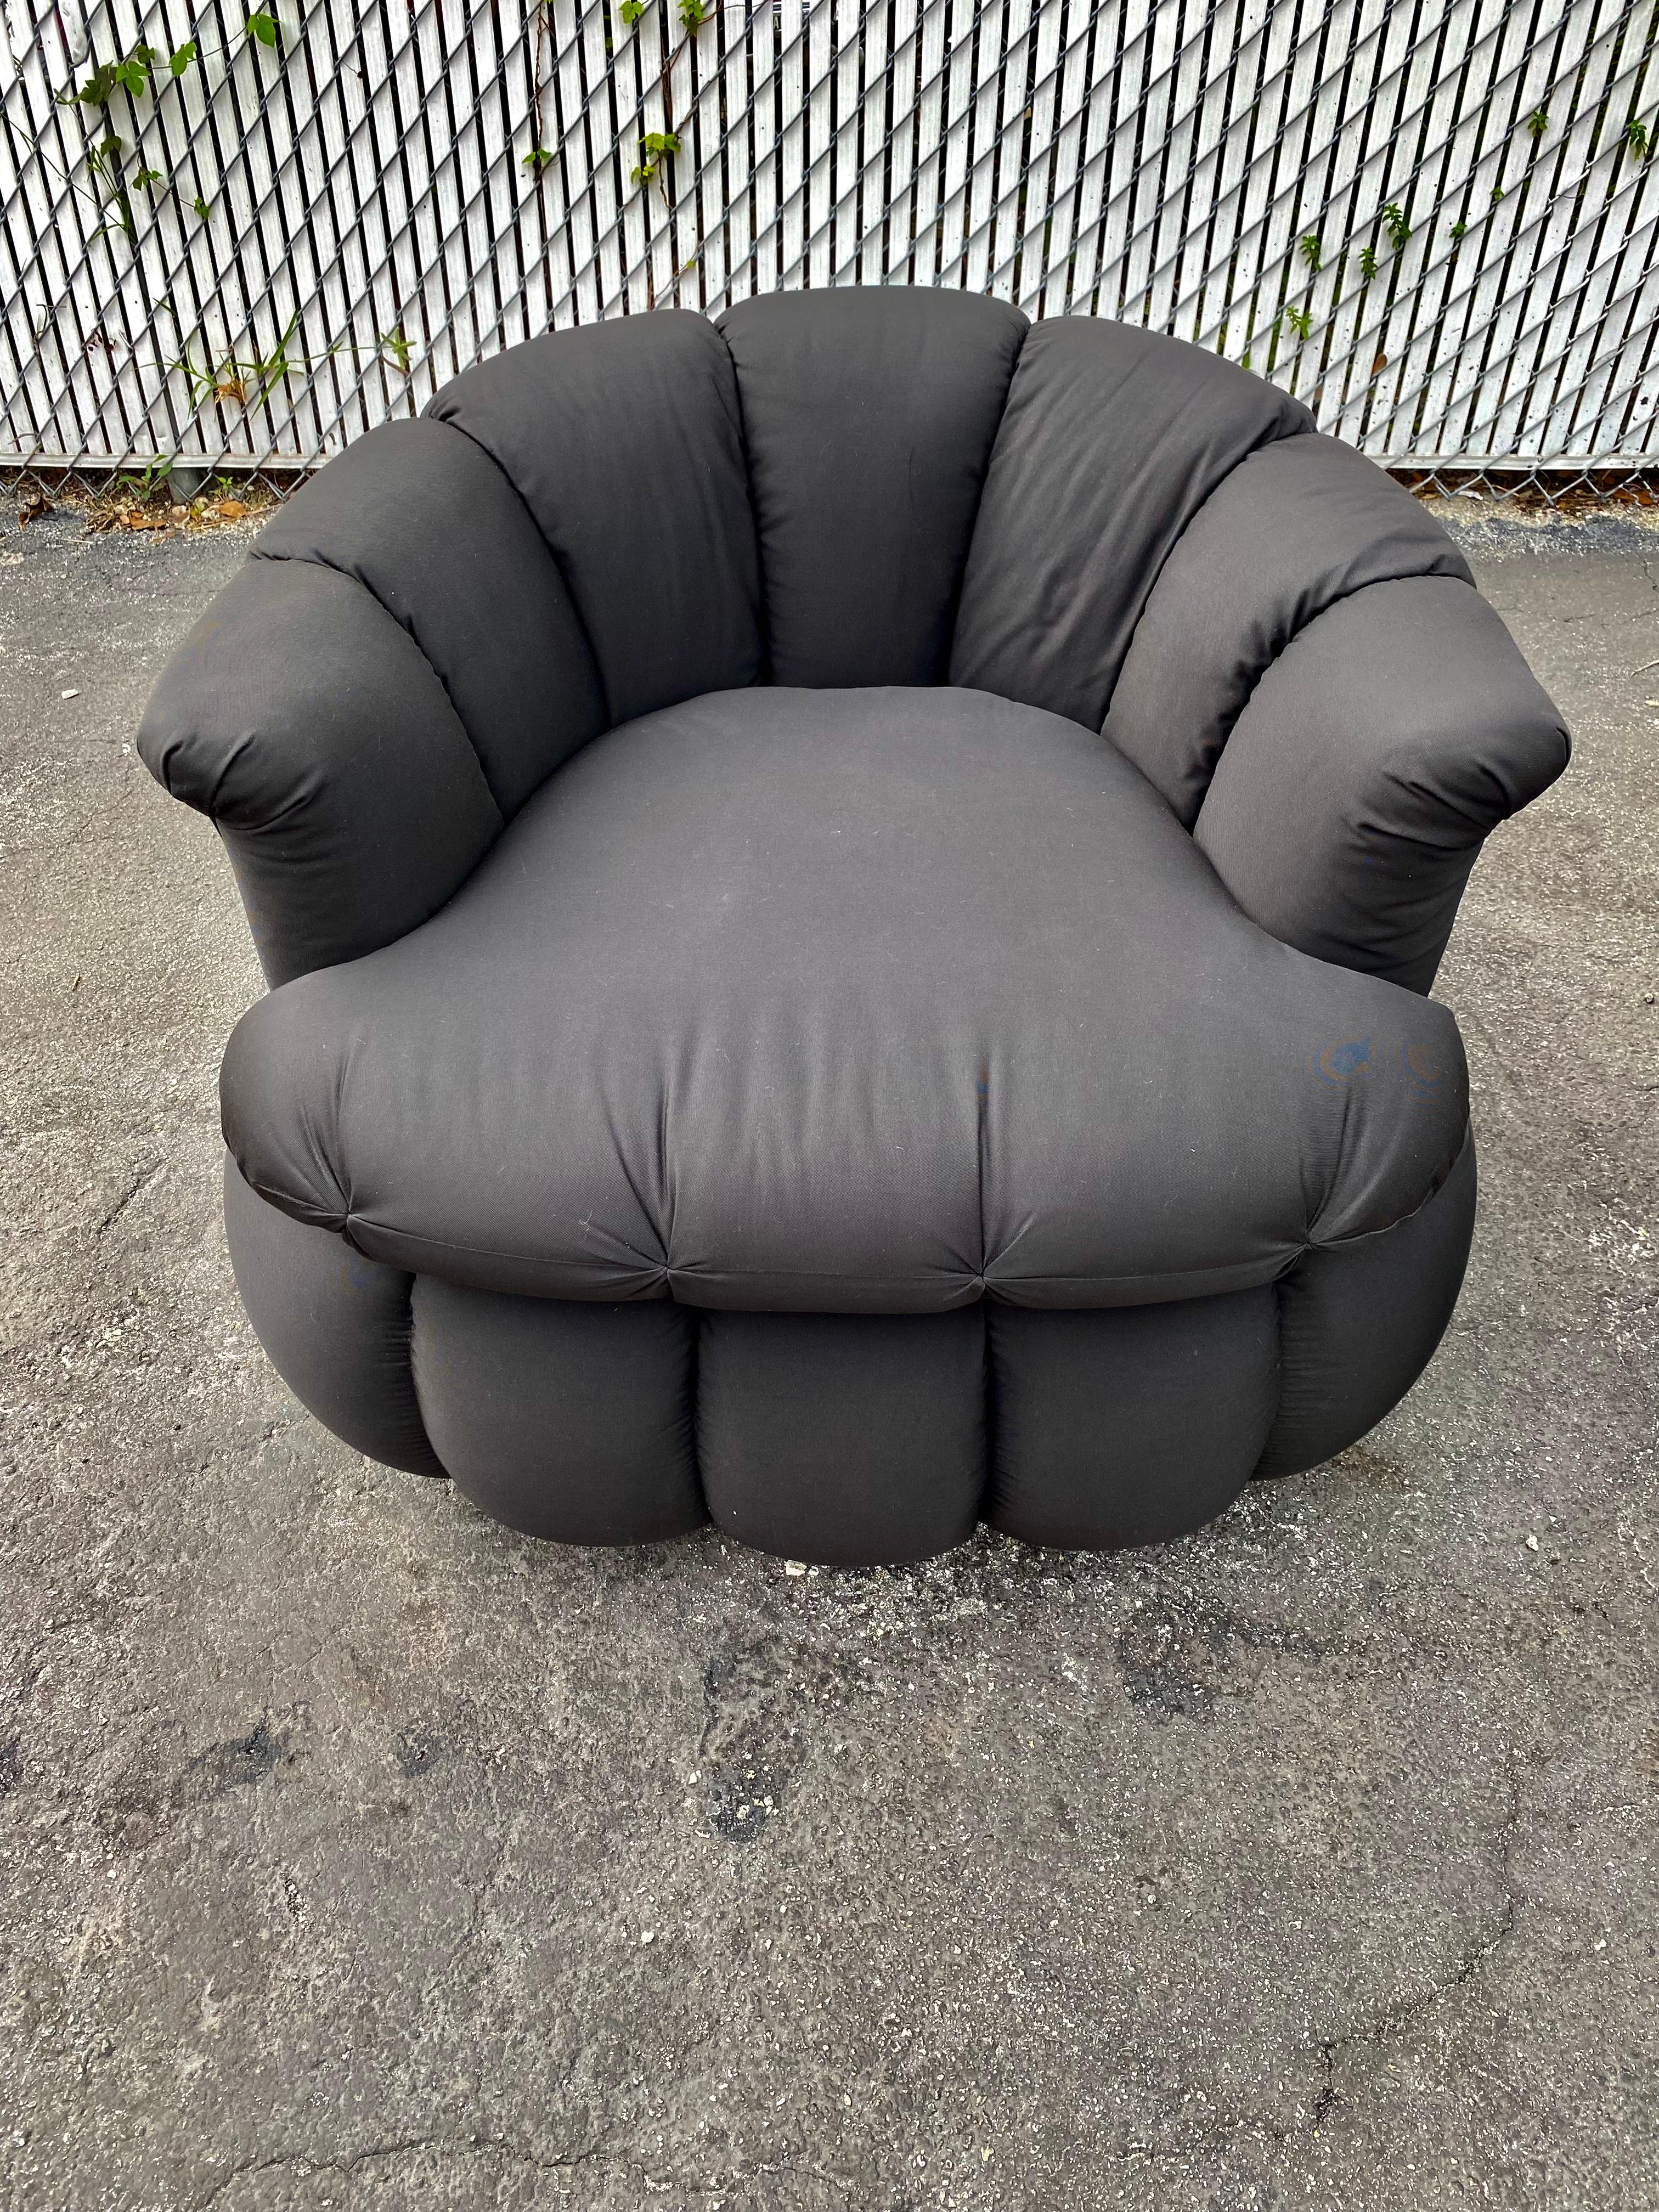 1980 Croissant Tufted Channeled Swivel Chairs, Set of 2 en vente 2